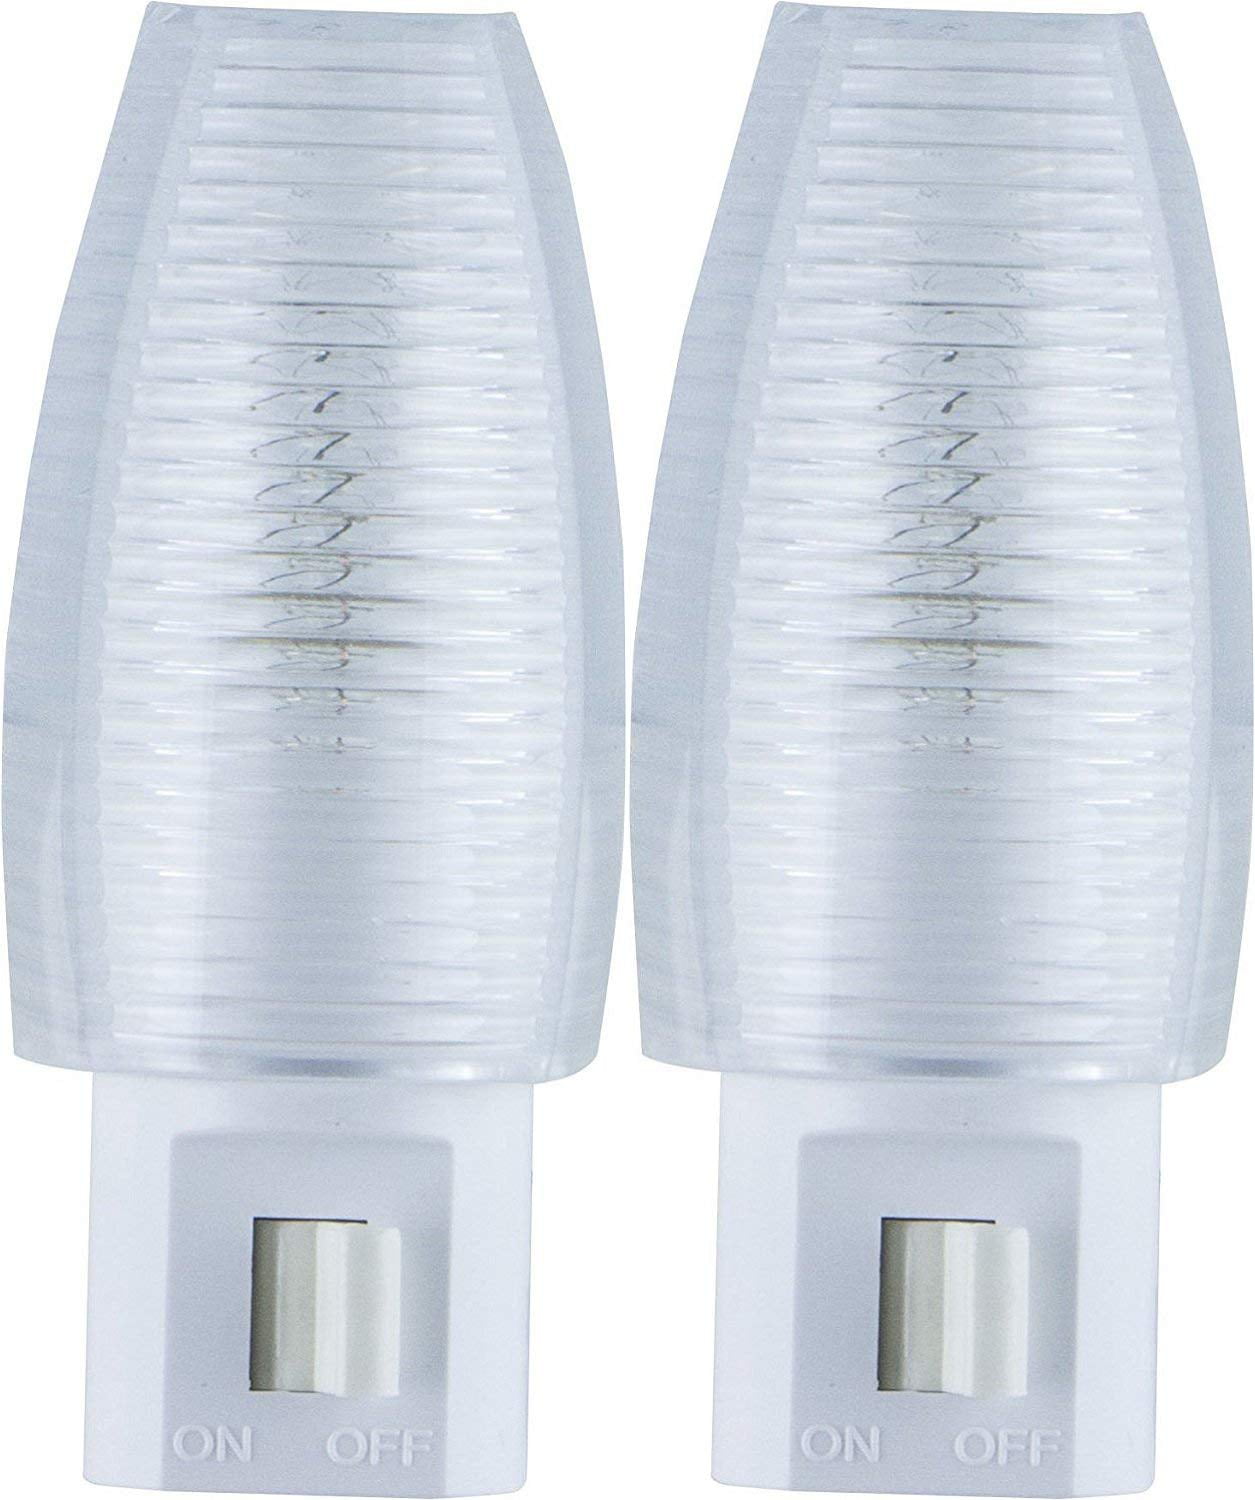 Lights By Night Manual On/Off Incandescent Night Light Pack of 2 Light Bulb Clear Shade